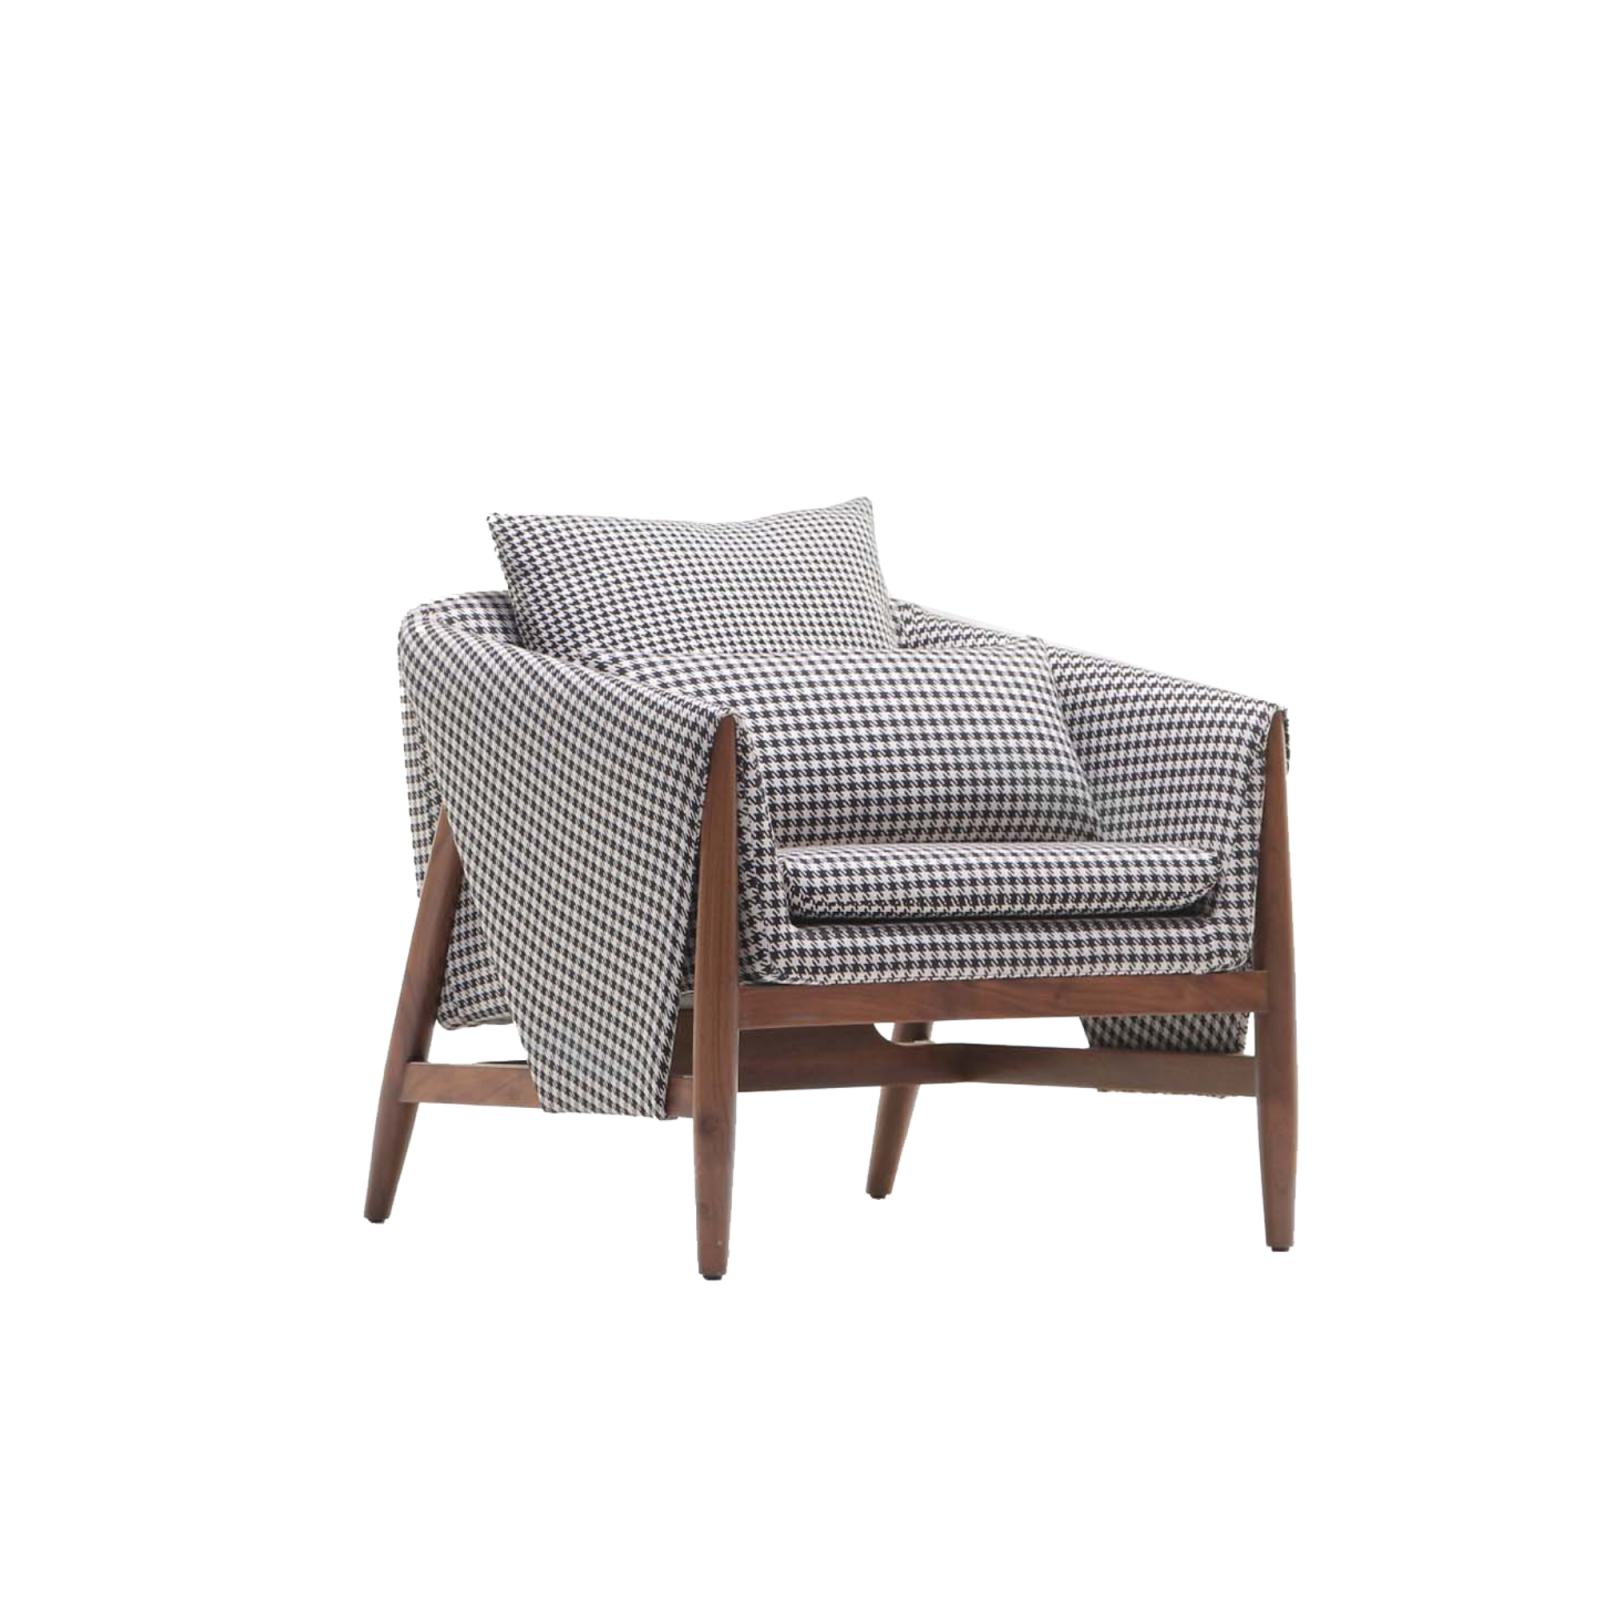 Gross armchair consisting of a solid and thin wooden frame, a structured foundation with graphic effect textiles